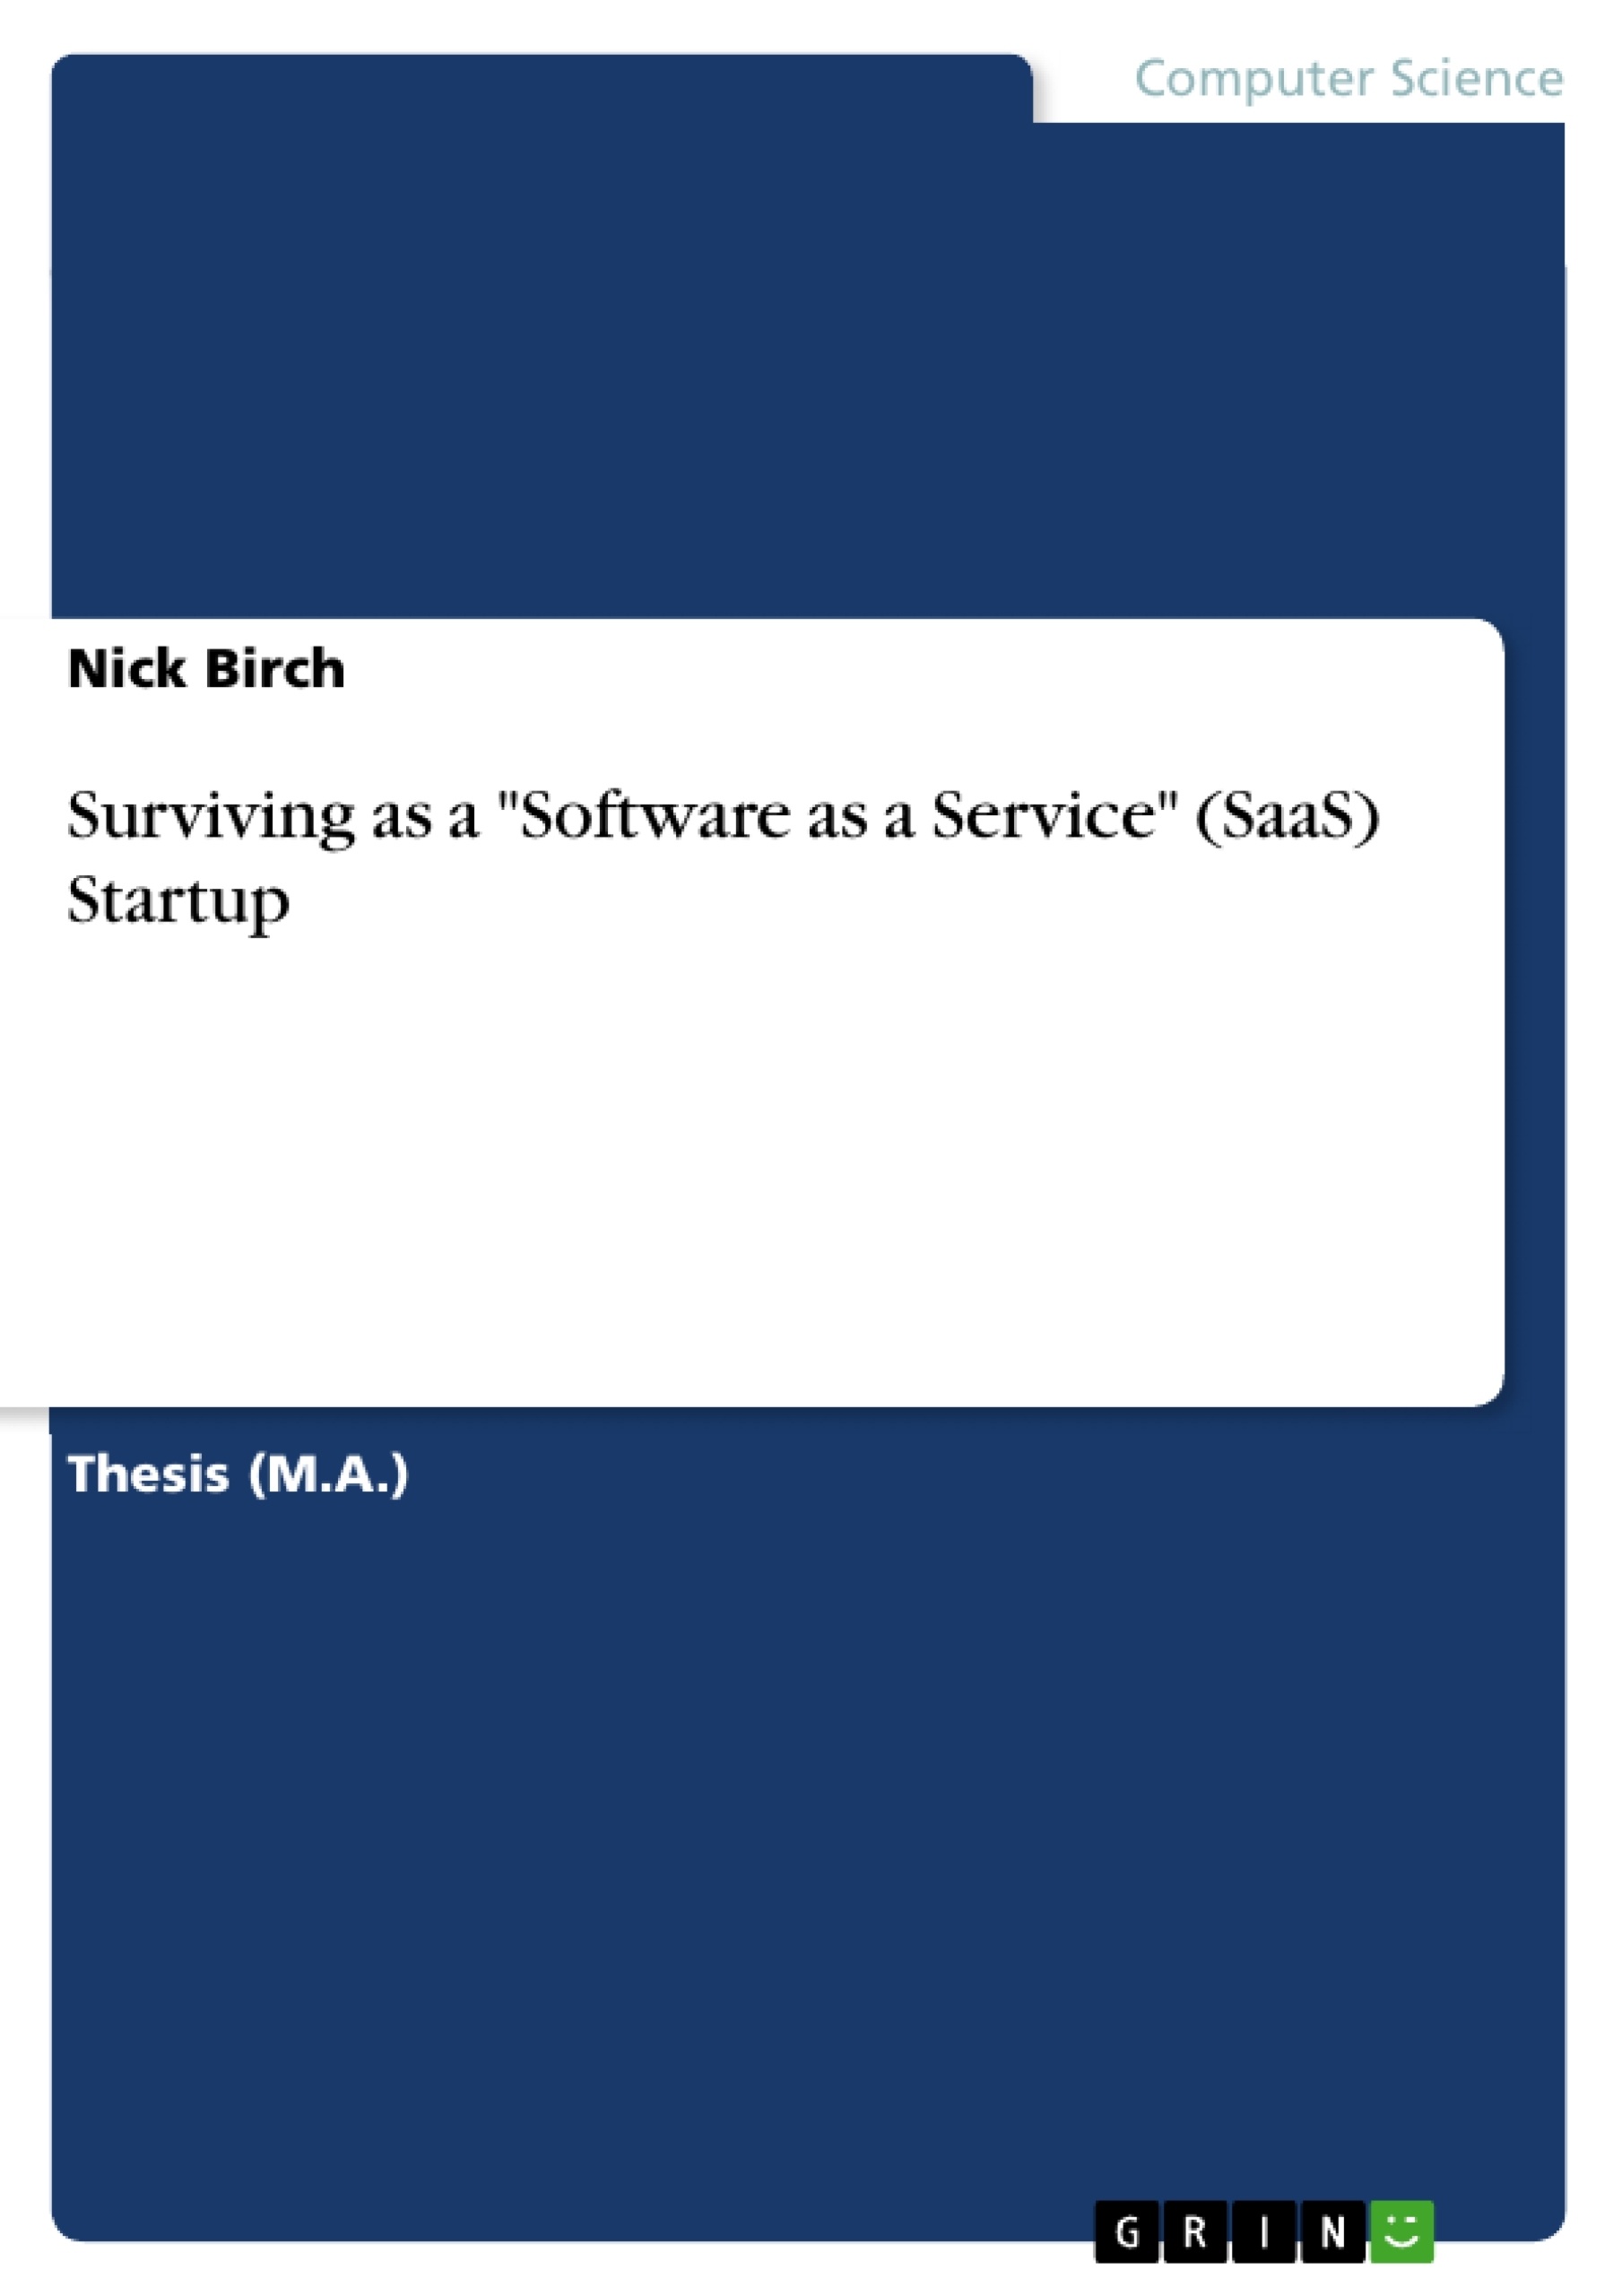 Title: Surviving as a "Software as a Service" (SaaS) Startup